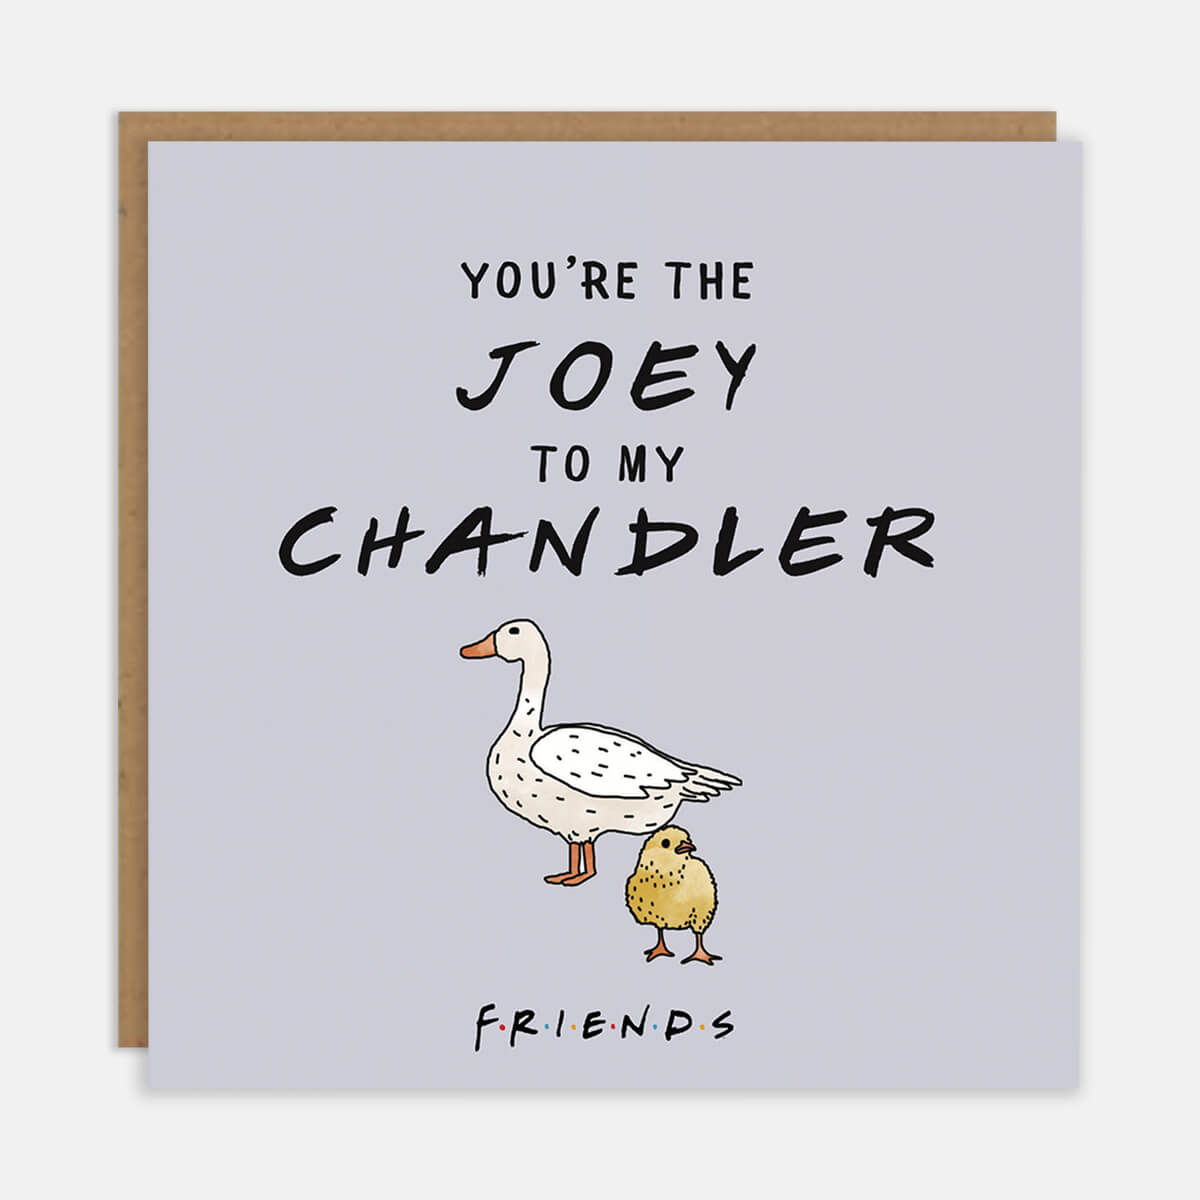 Friends TV Show Card - Friends Merchandise - Grey card reads "You're the joey to my chandler" and features an image of the chick and duck